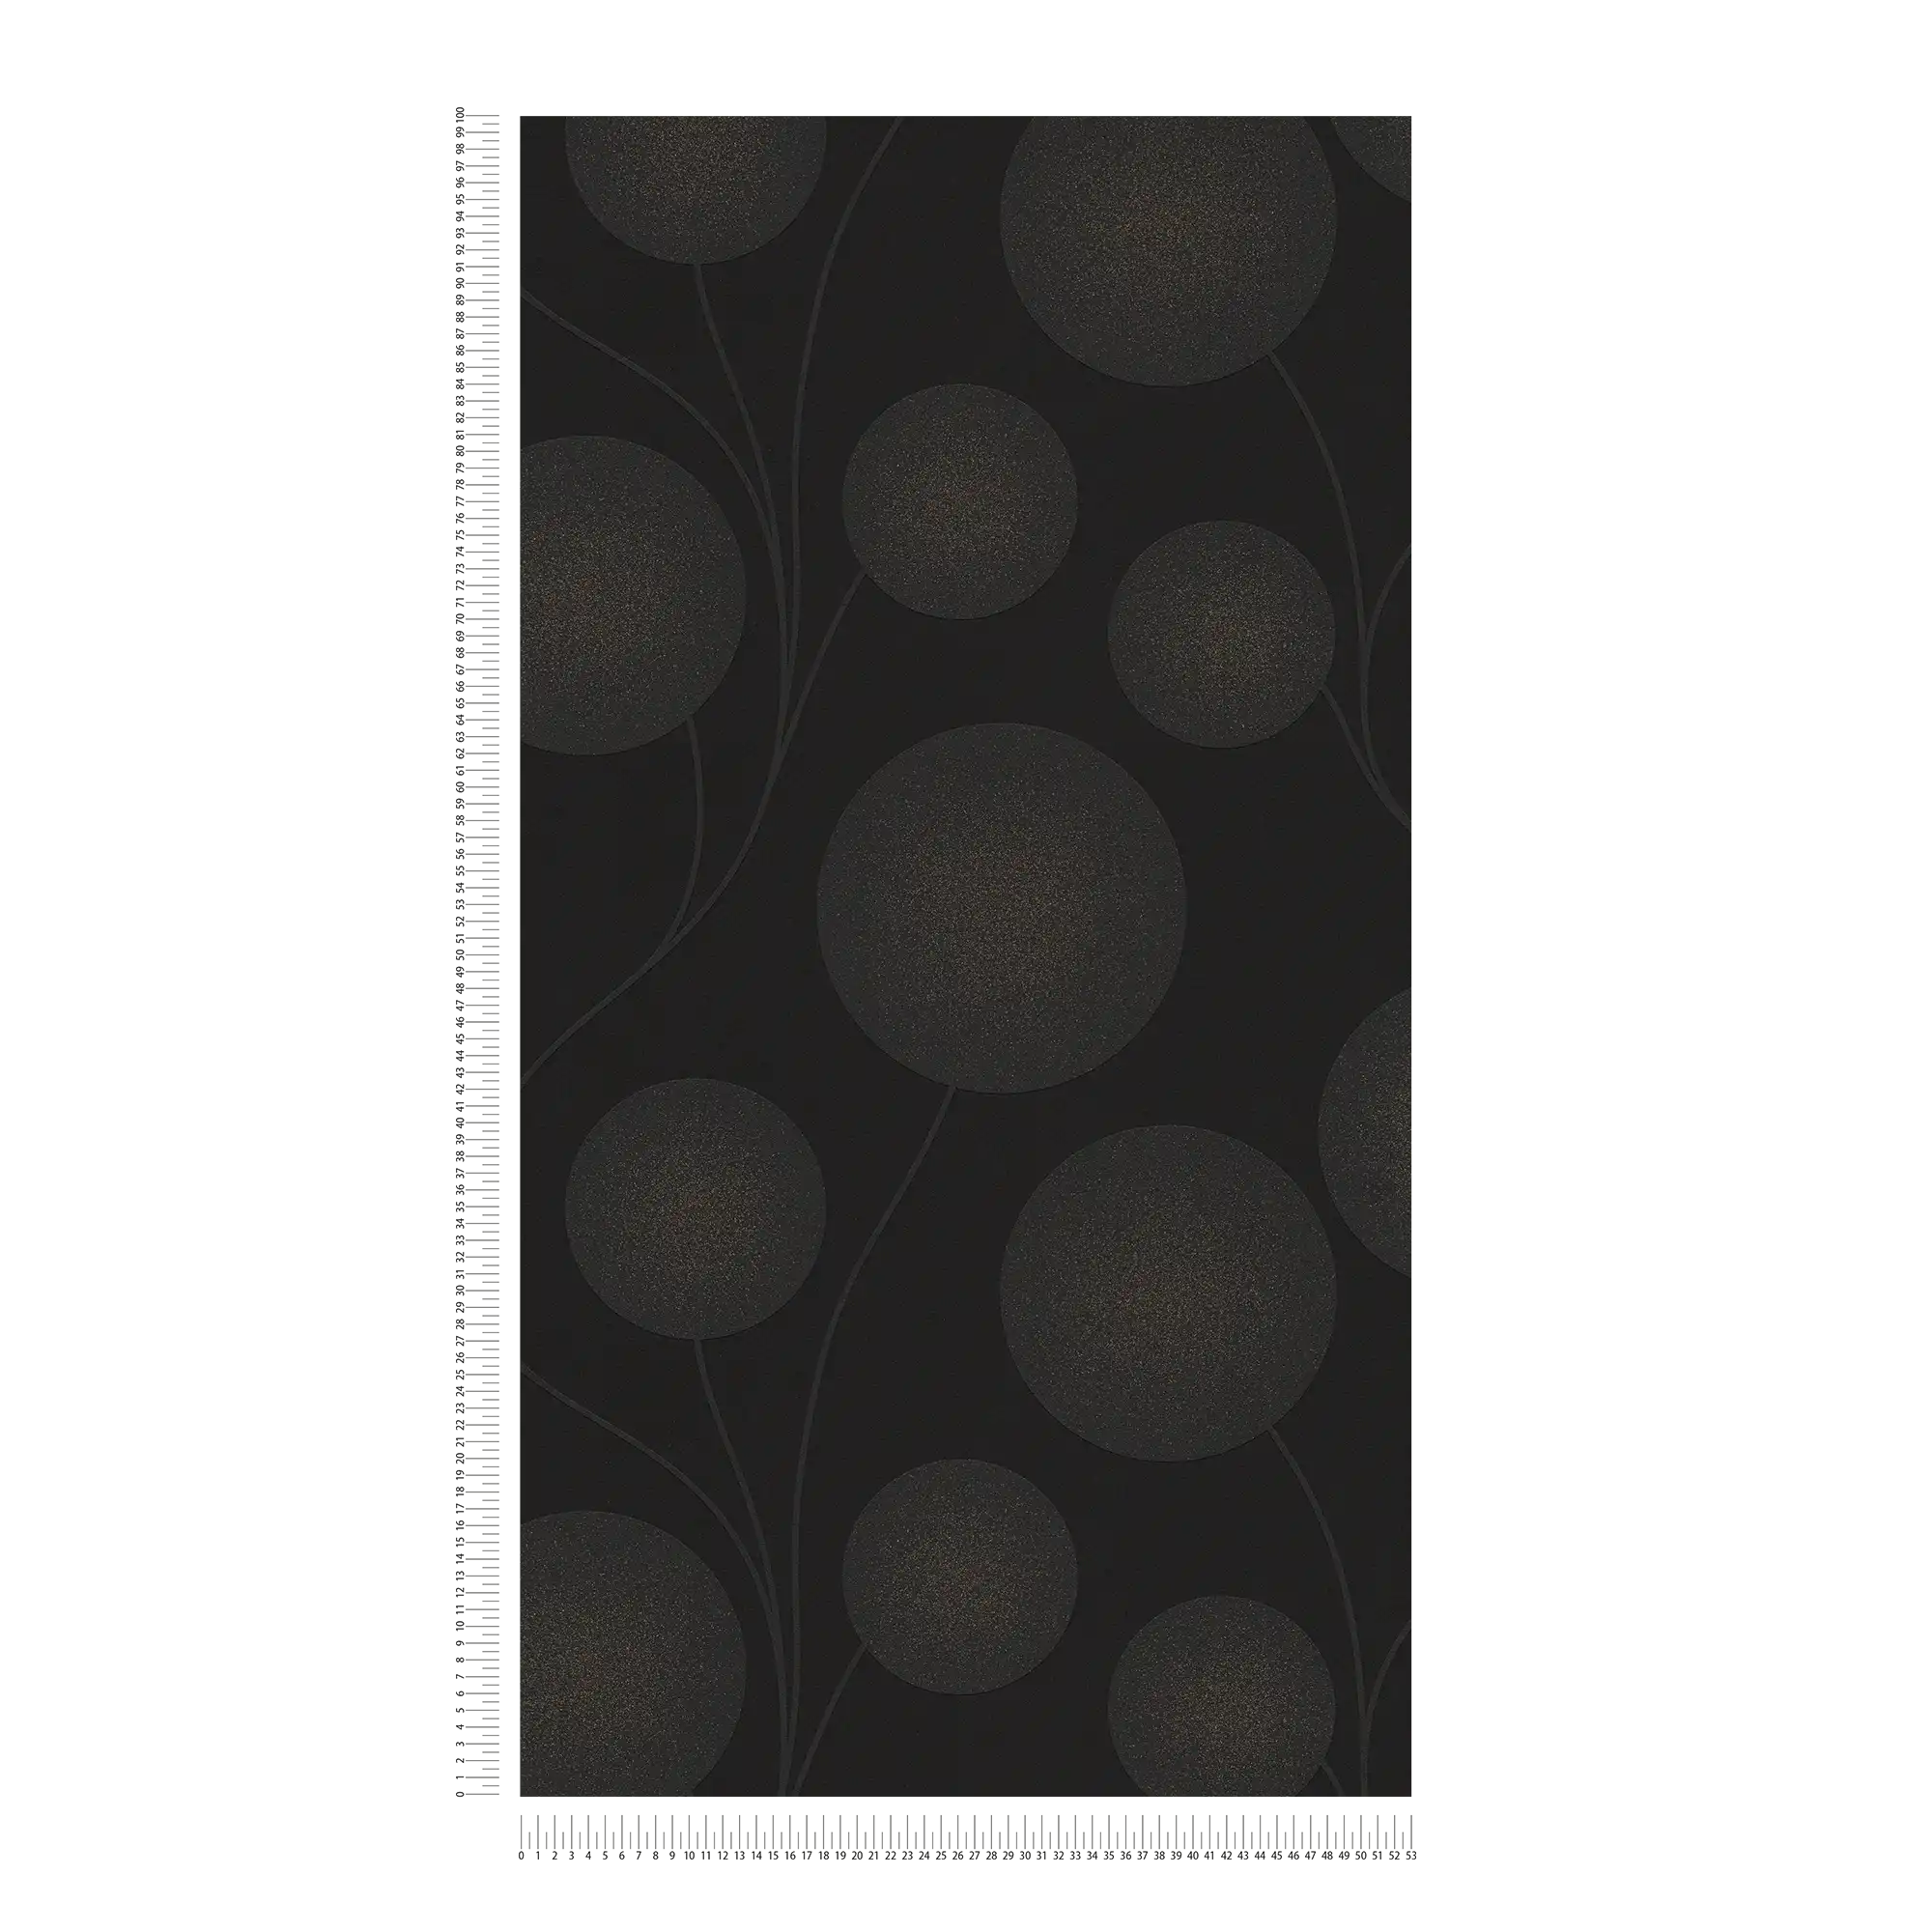             Wallpaper with dots design and texture pattern - black, gold
        